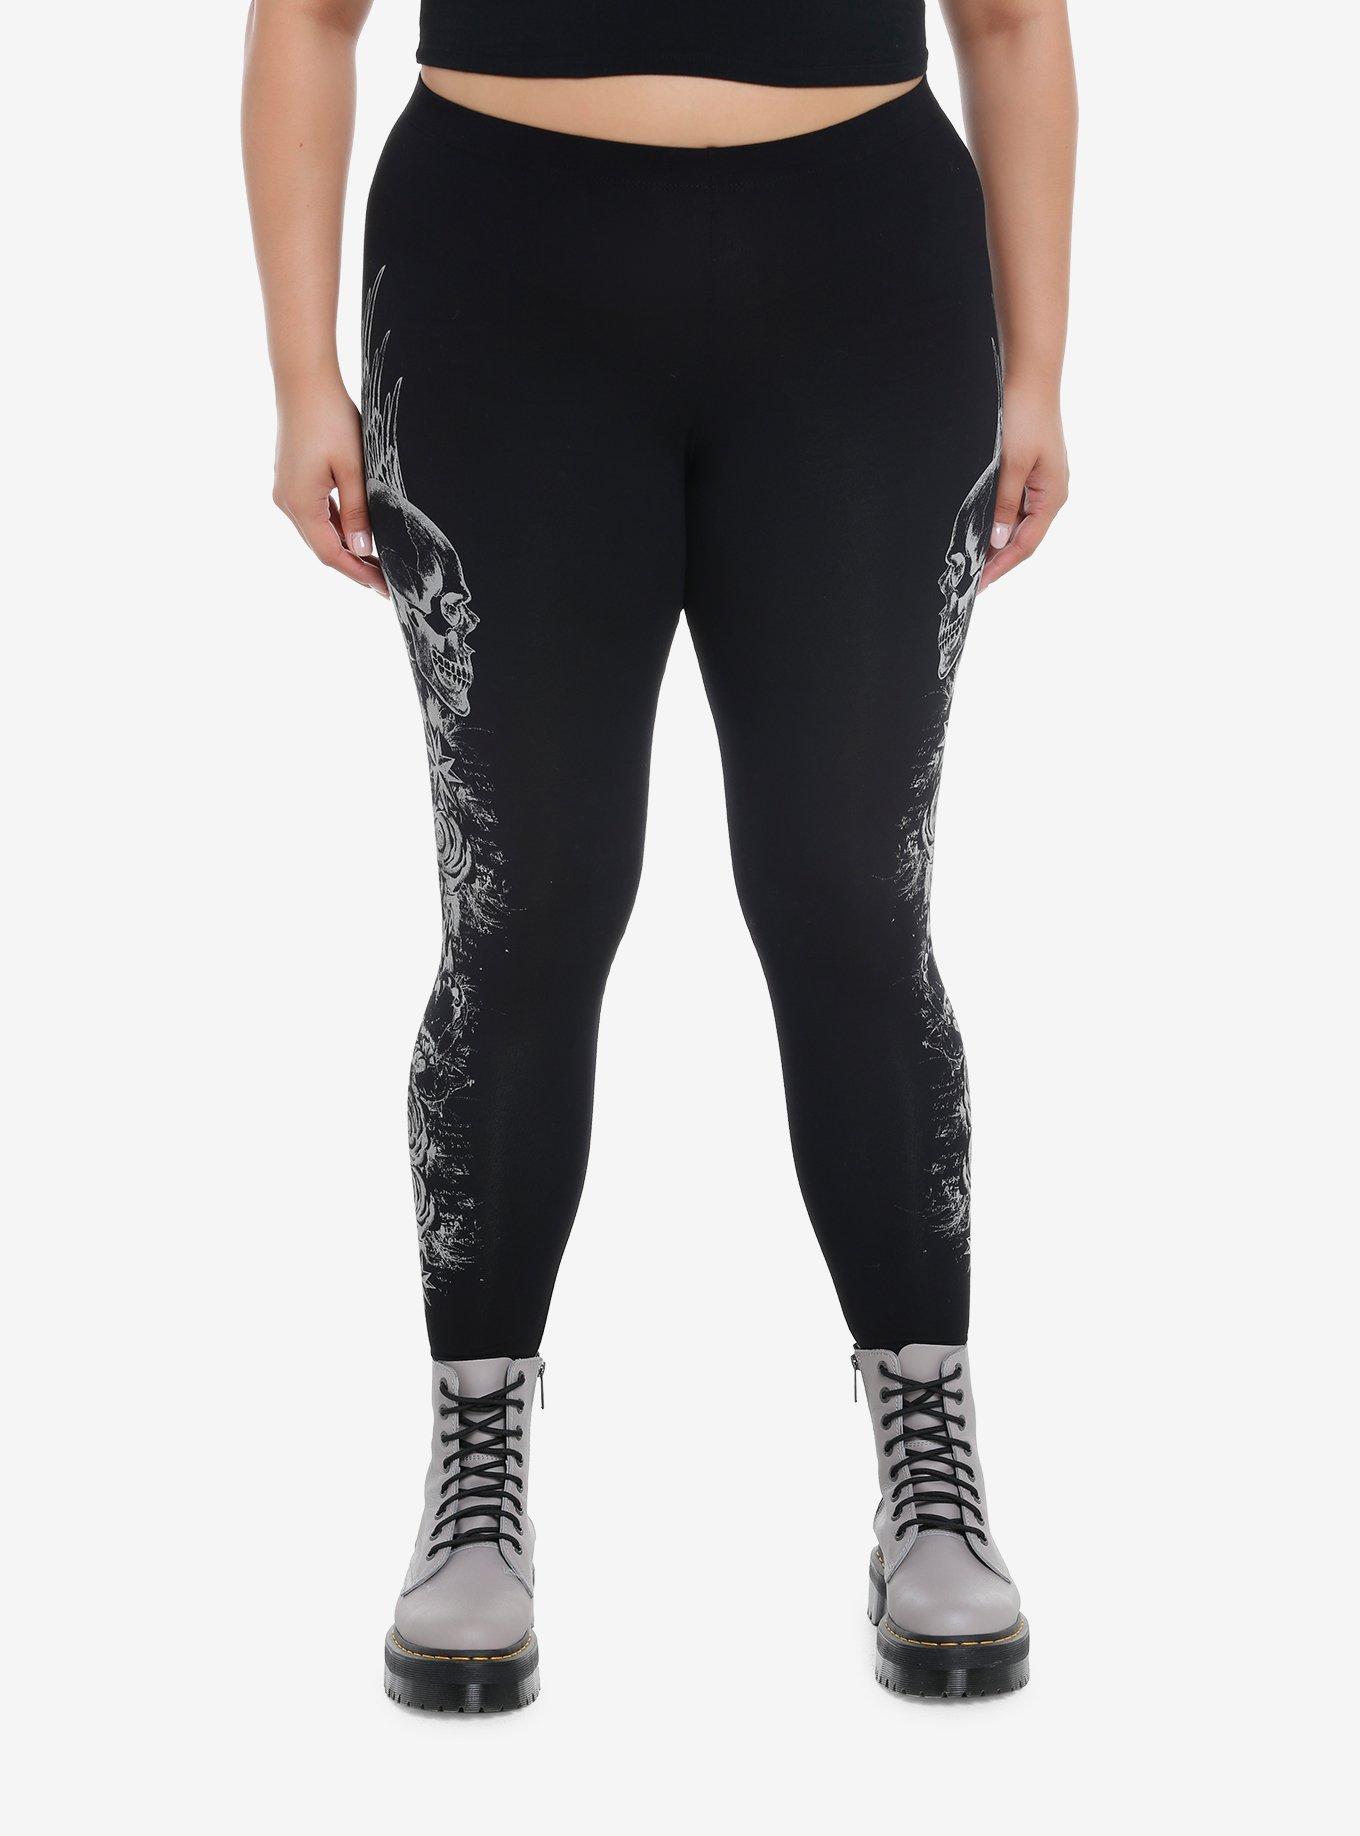 Cool Wholesale skull leggings In Any Size And Style 